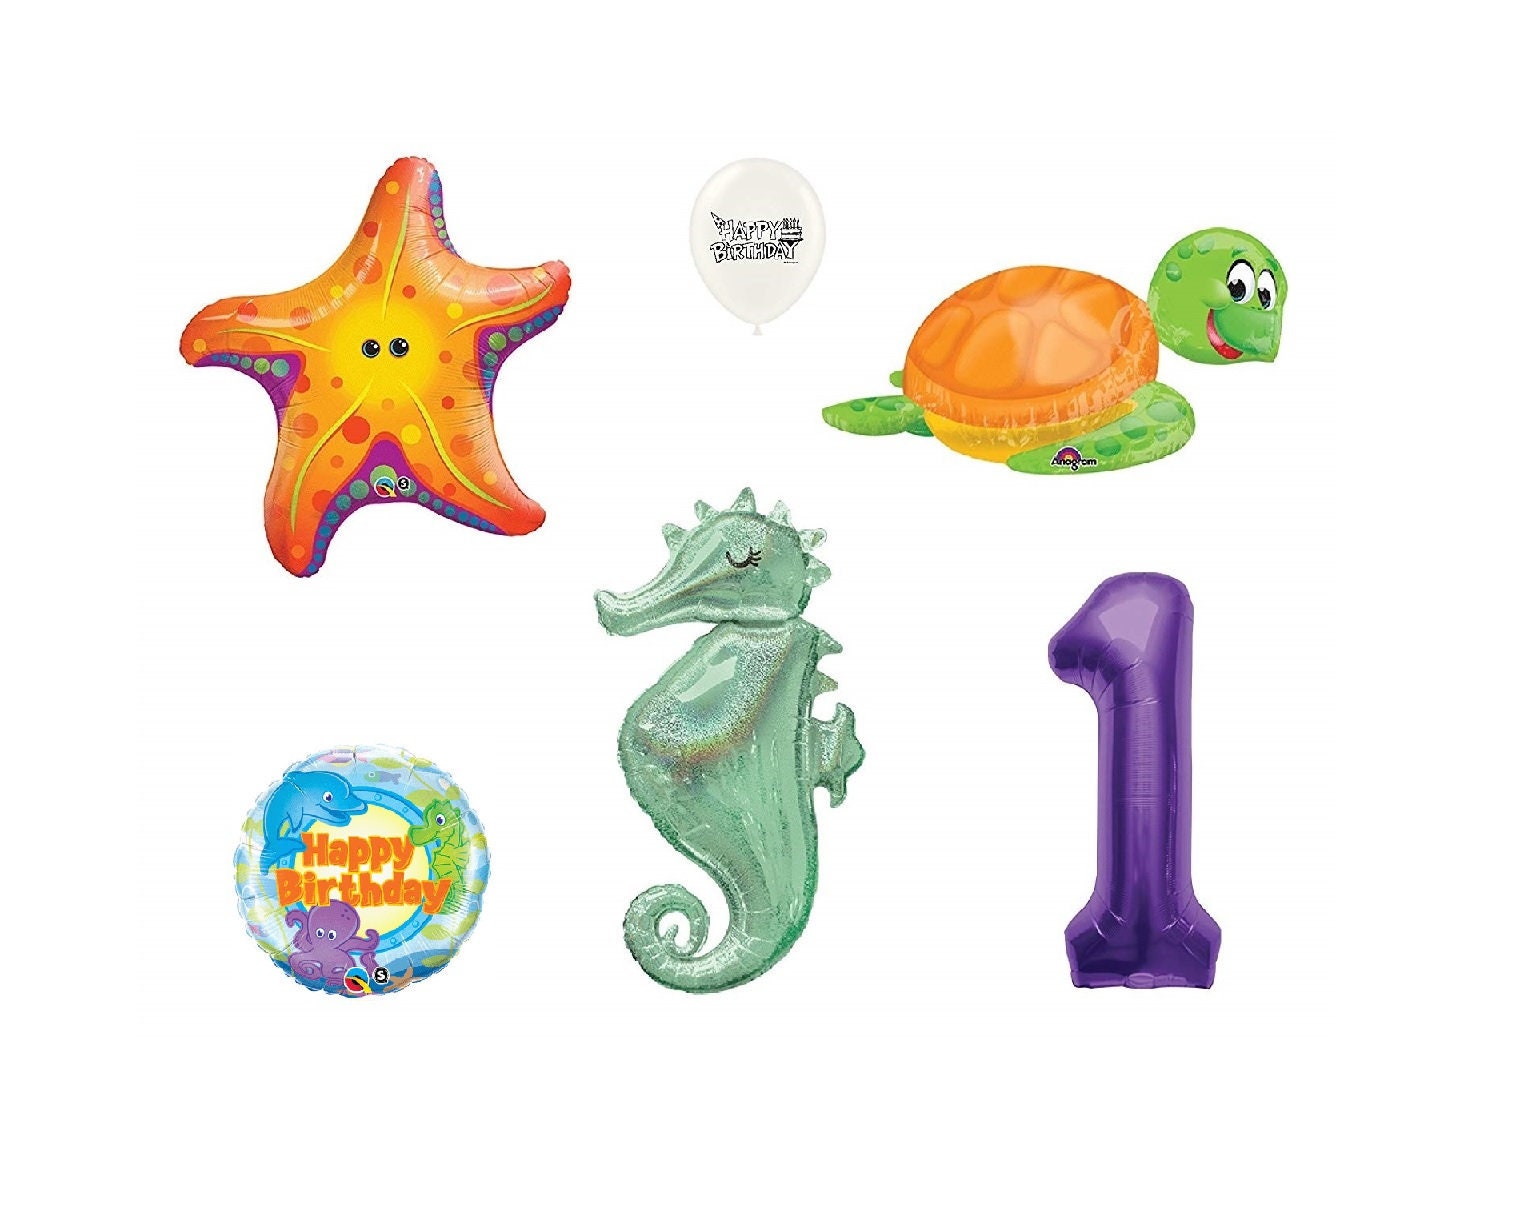 18 Happy Birthday Clear Stuffing Balloons 